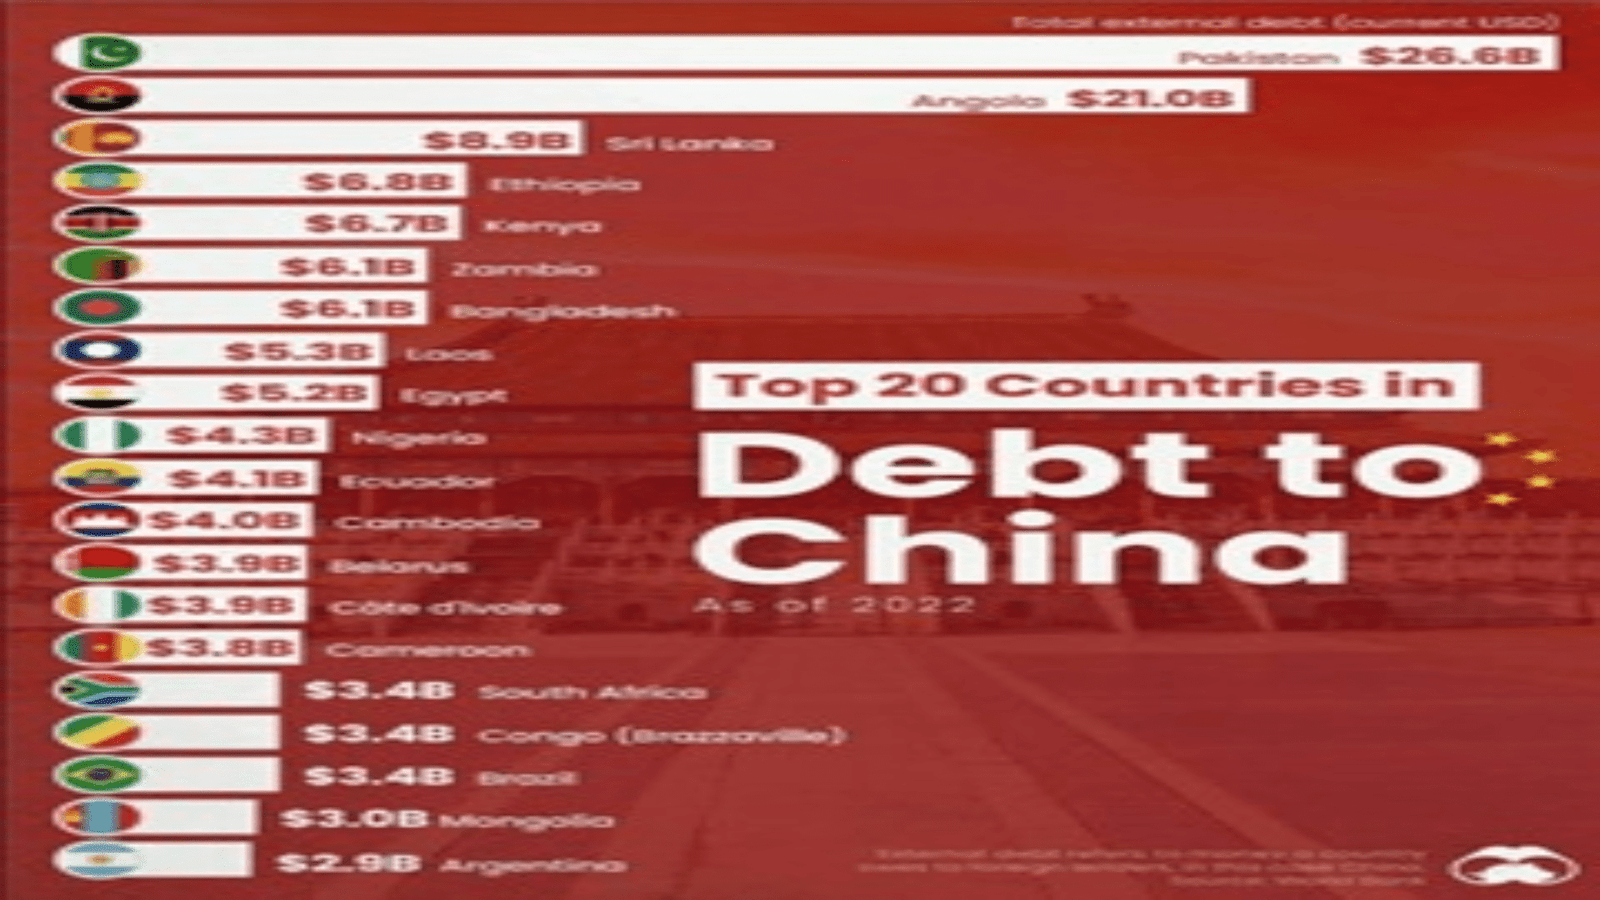 Pakistan tops list of countries borrowing from China